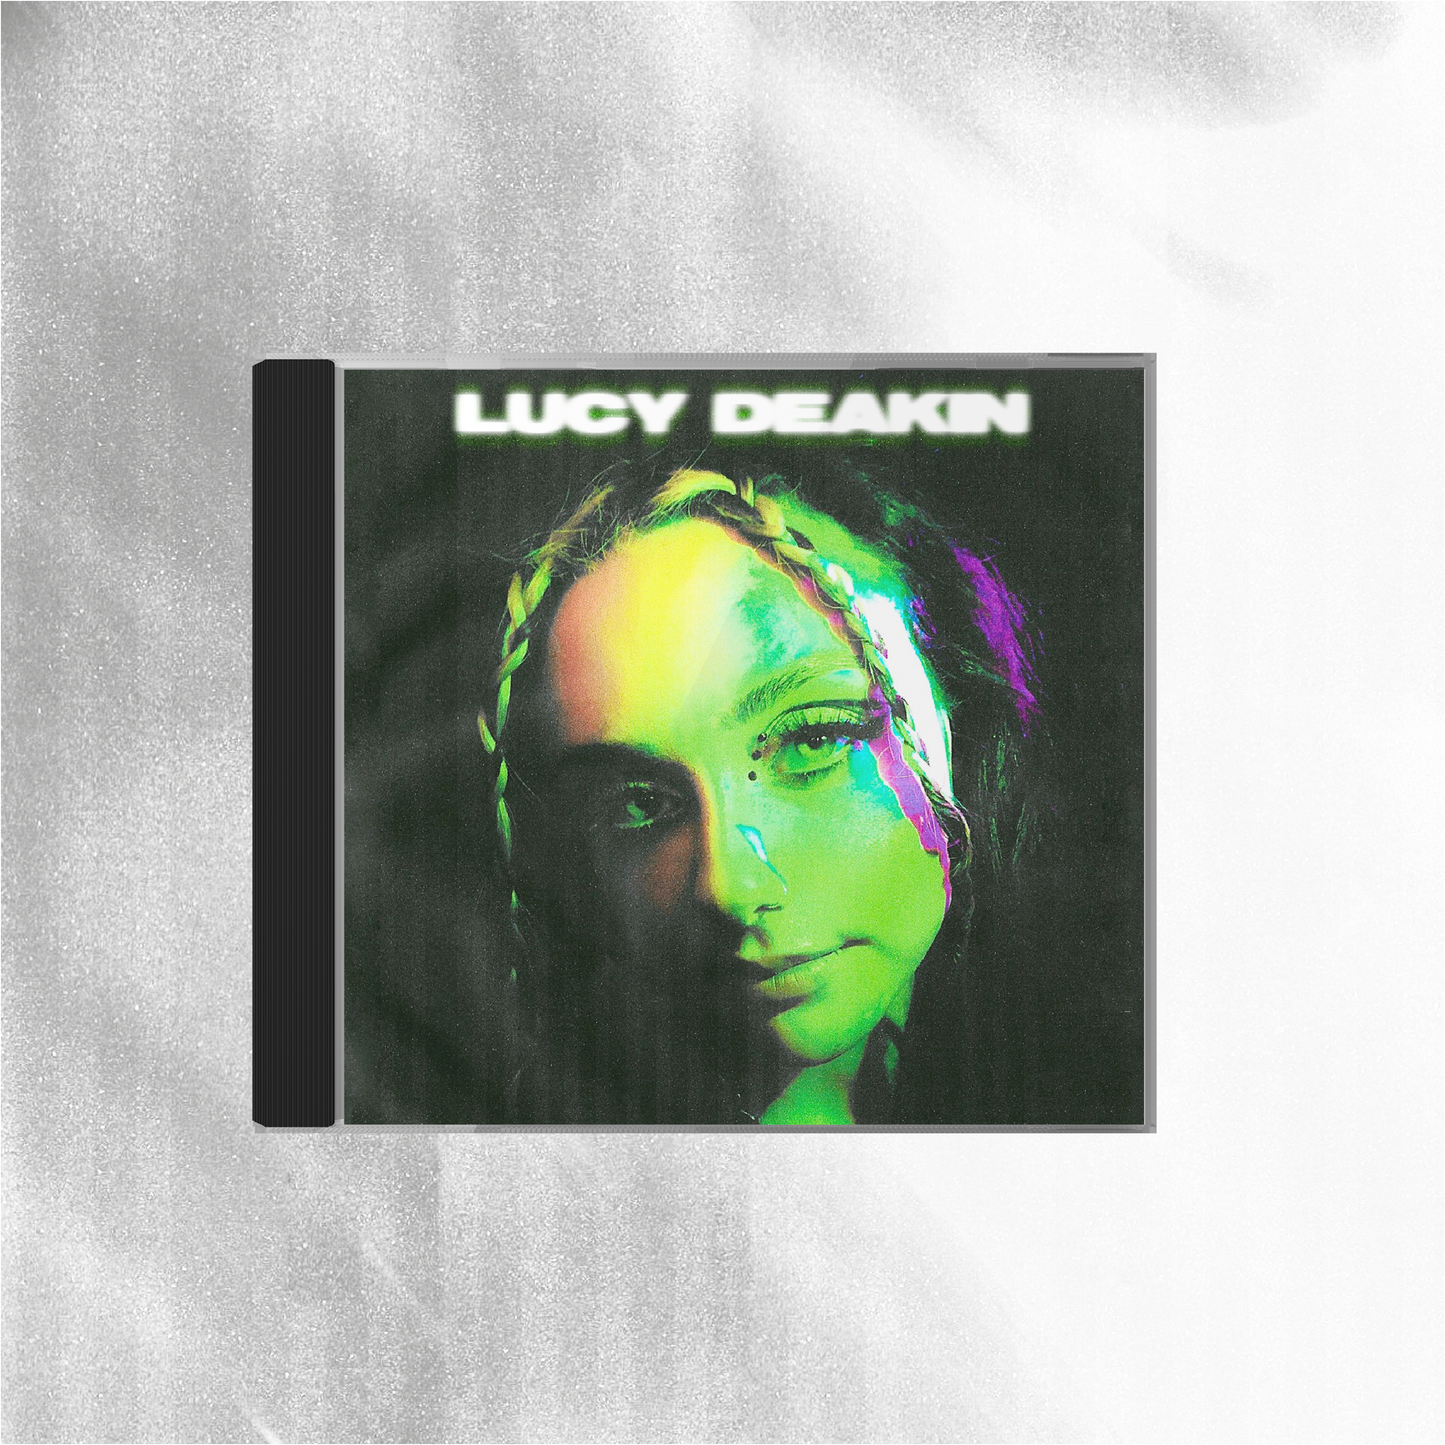 Lucy Deakin - 'in your head i'm probably crying' EP - CD